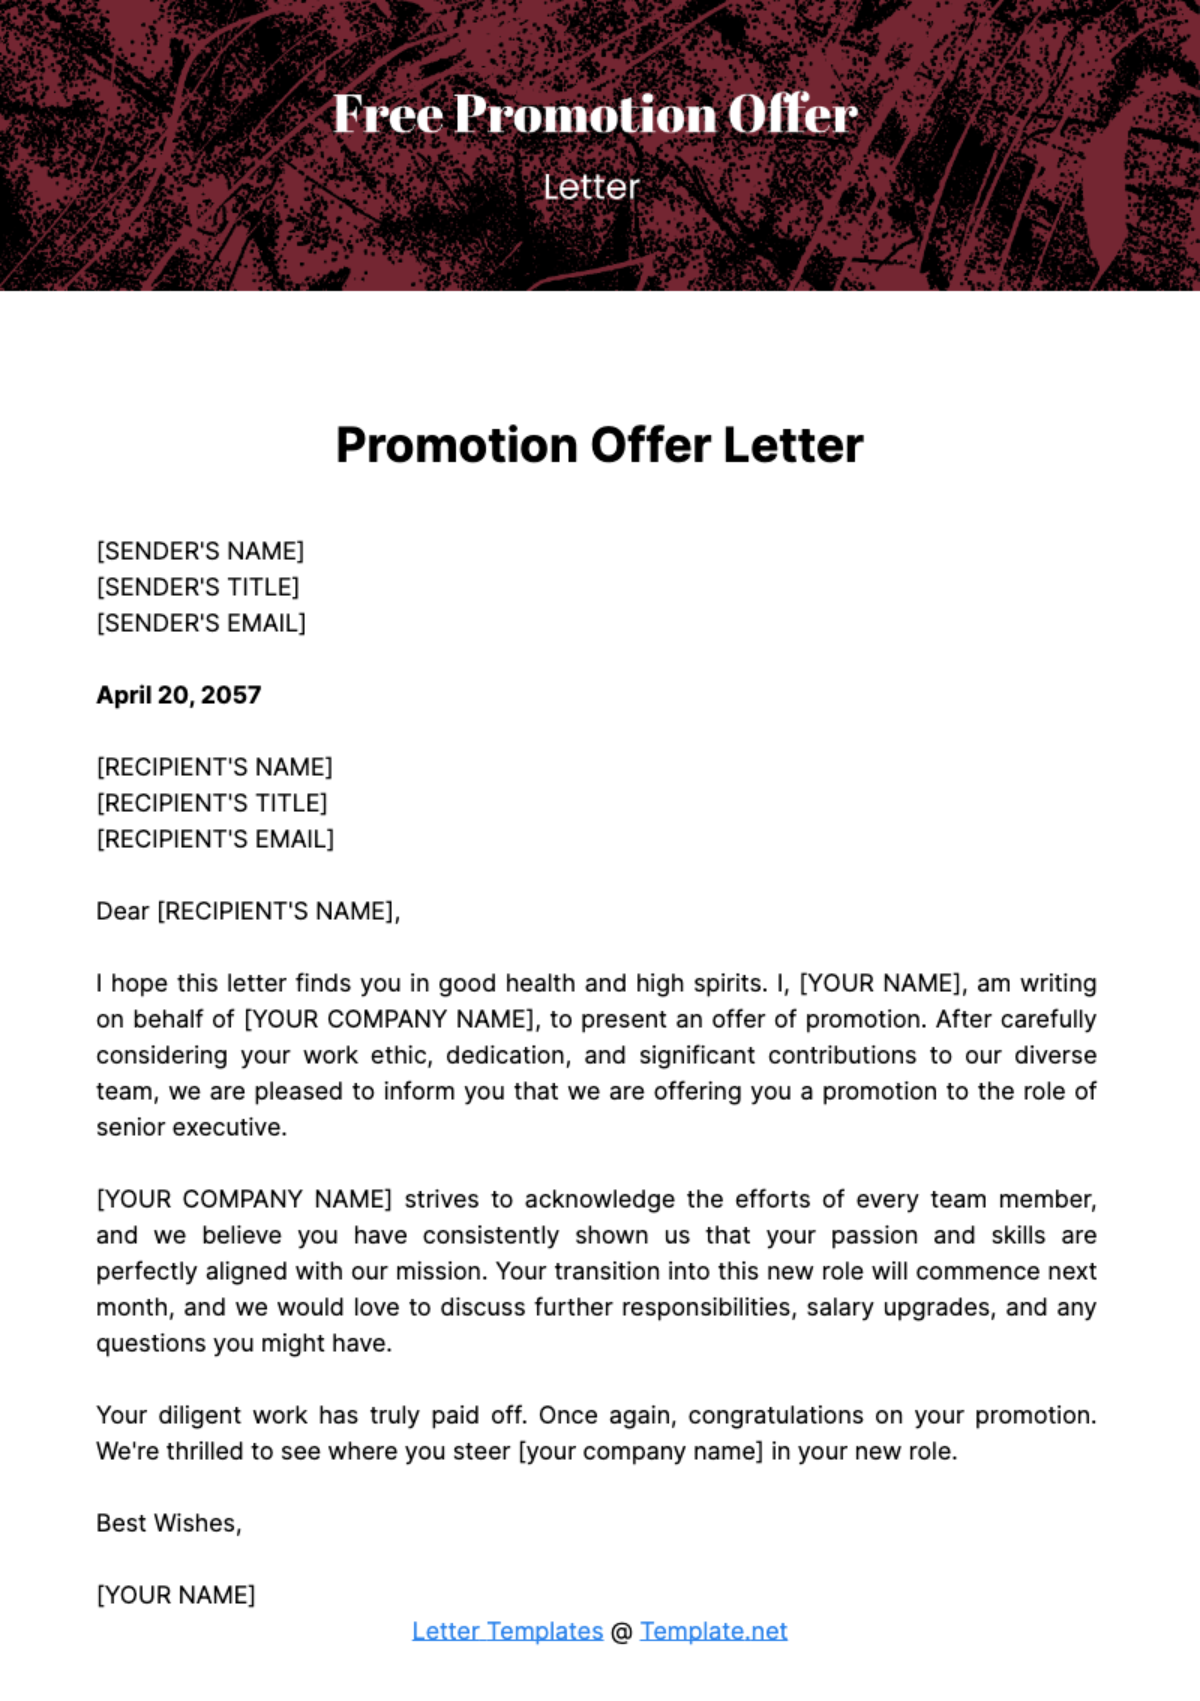 Free Promotion Offer Letter Template